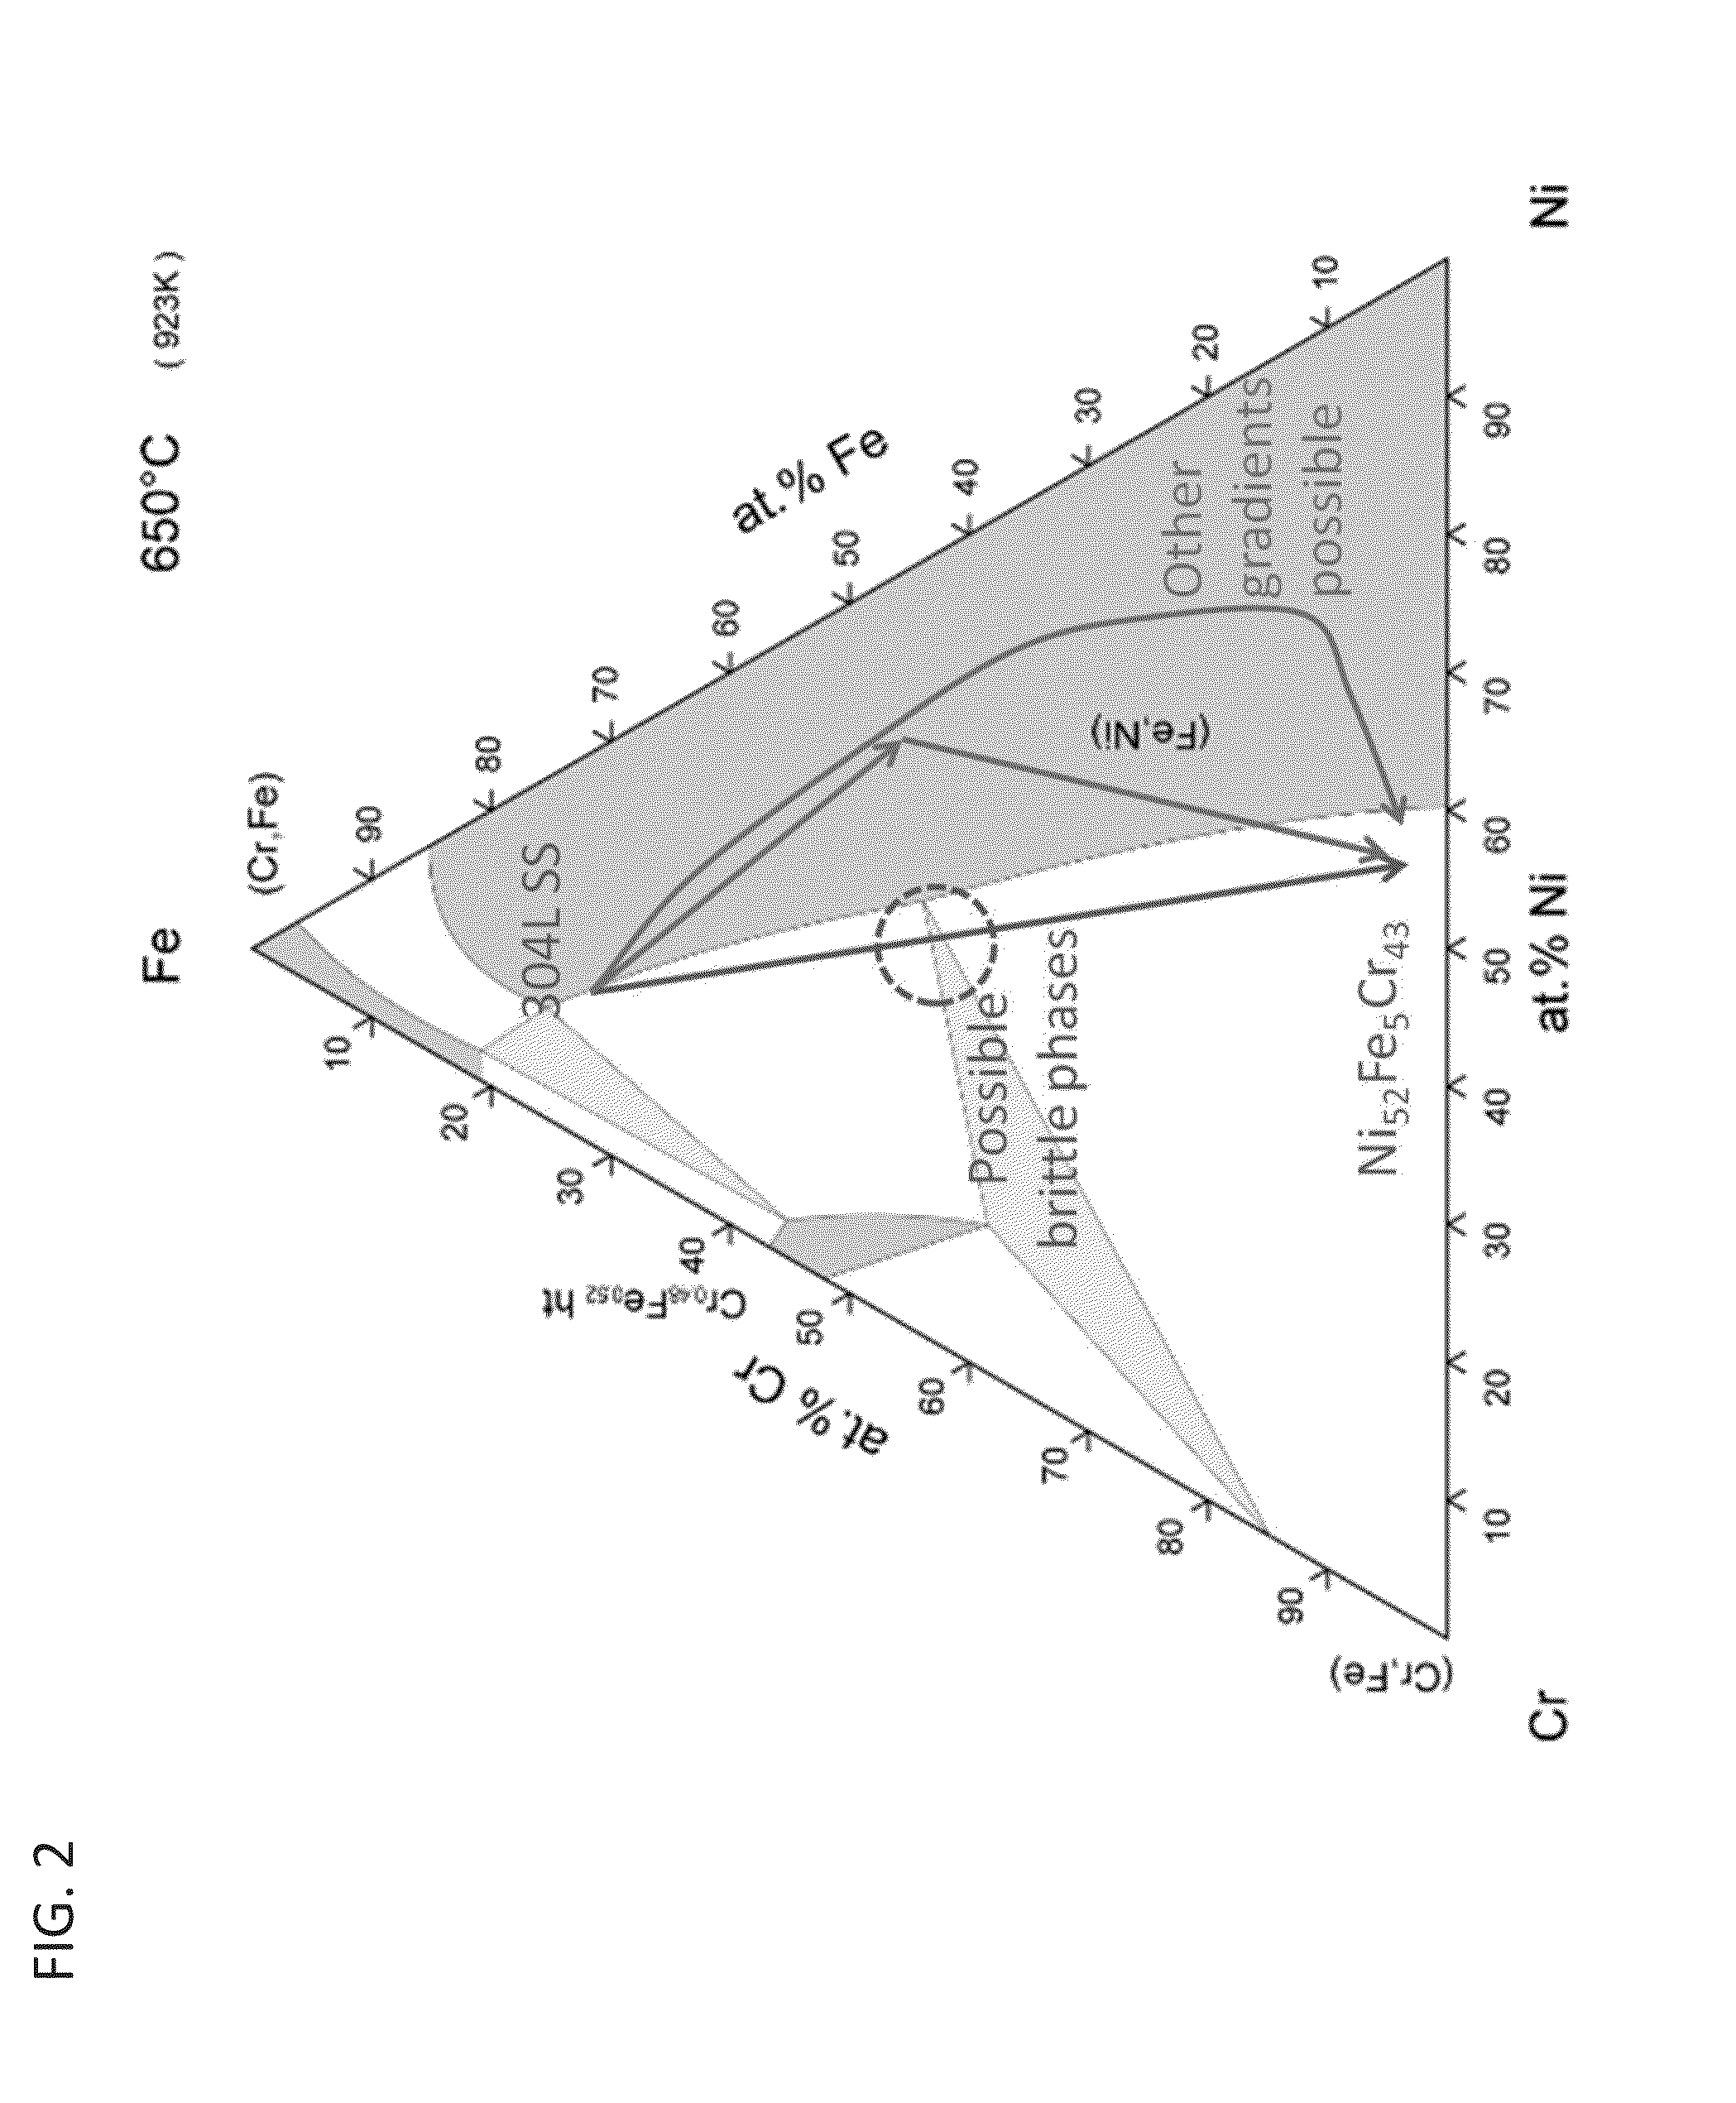 Methods for fabricating gradient alloy articles with multi-functional properties